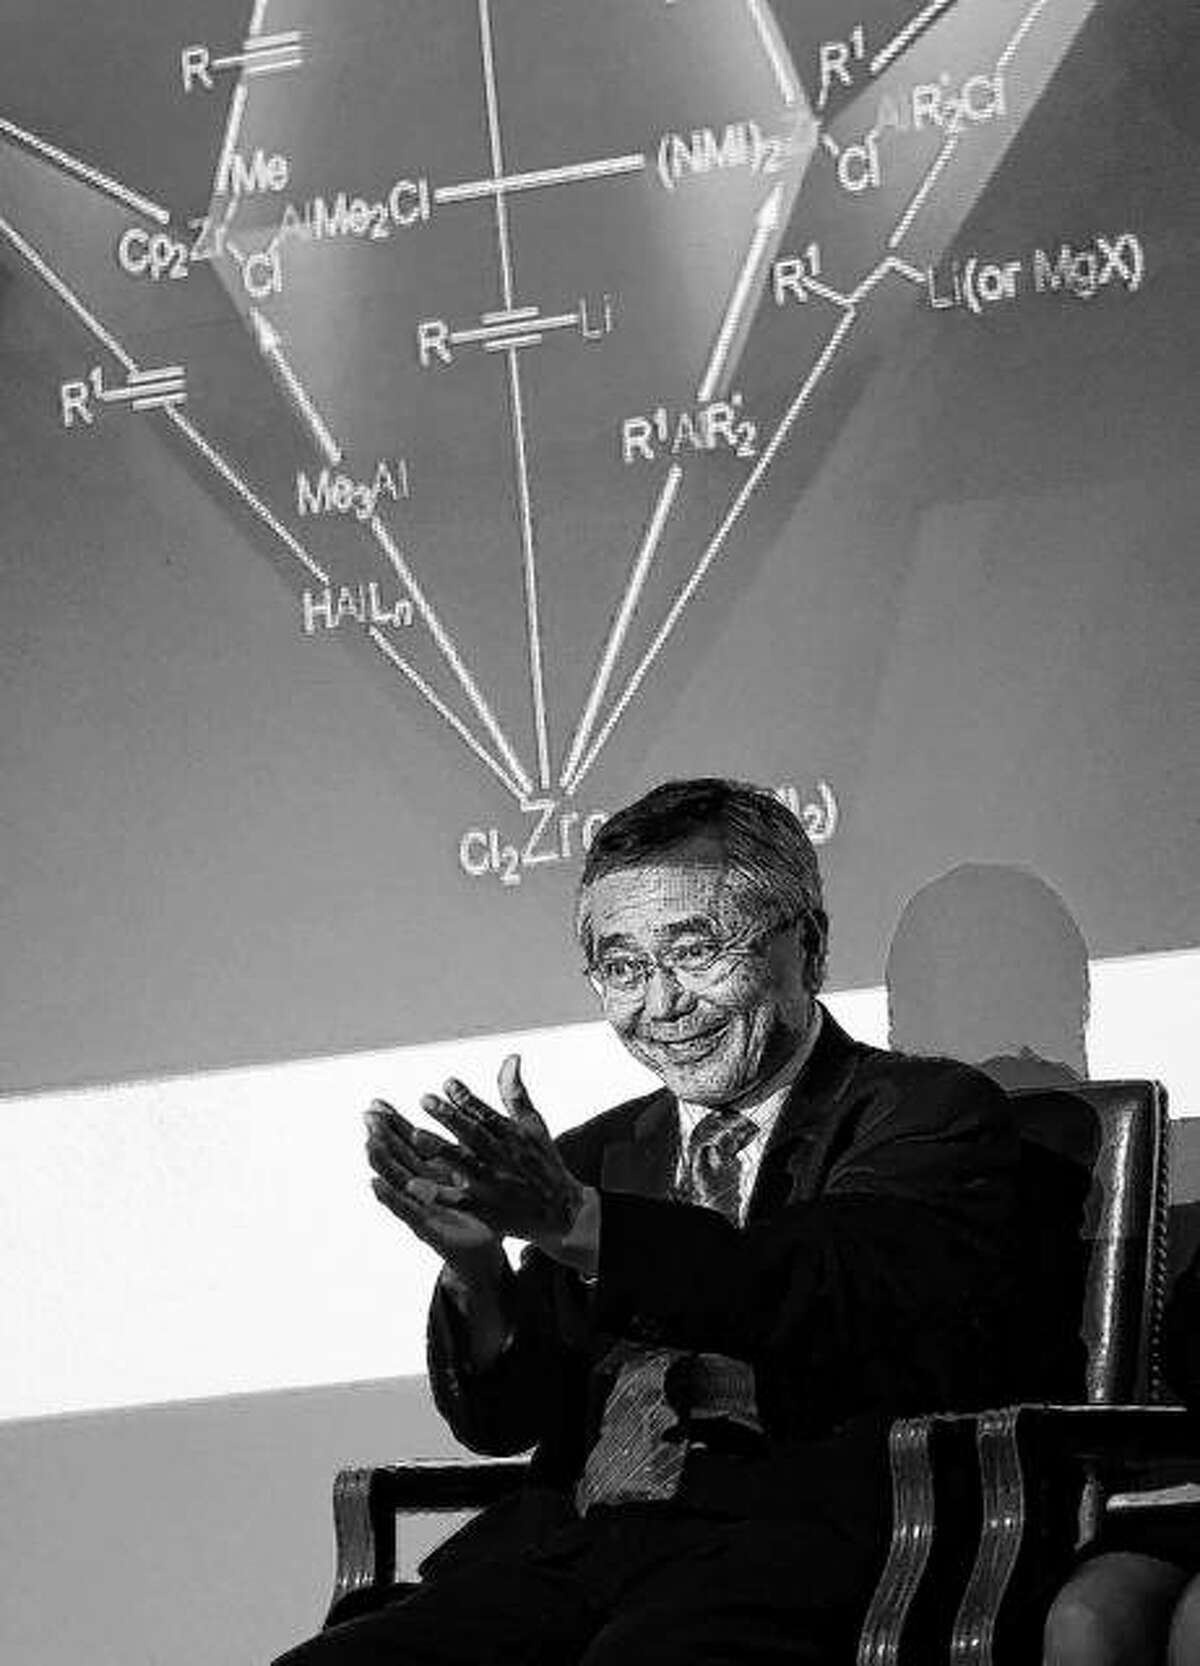 Purdue professor and chemistry Nobel Laureate Ei-ichi Negishi applauds the audience as they applaud him as he is introduced before presenting his talk at Fowler Hall on the campus of Purdue University in West Lafayette, Indiana. Sumire Negishi was found dead Tuesday in a northern Illinois landfill after her 82-year-old husband Ei-ichi was found wandering a road south of Rockford, police said.